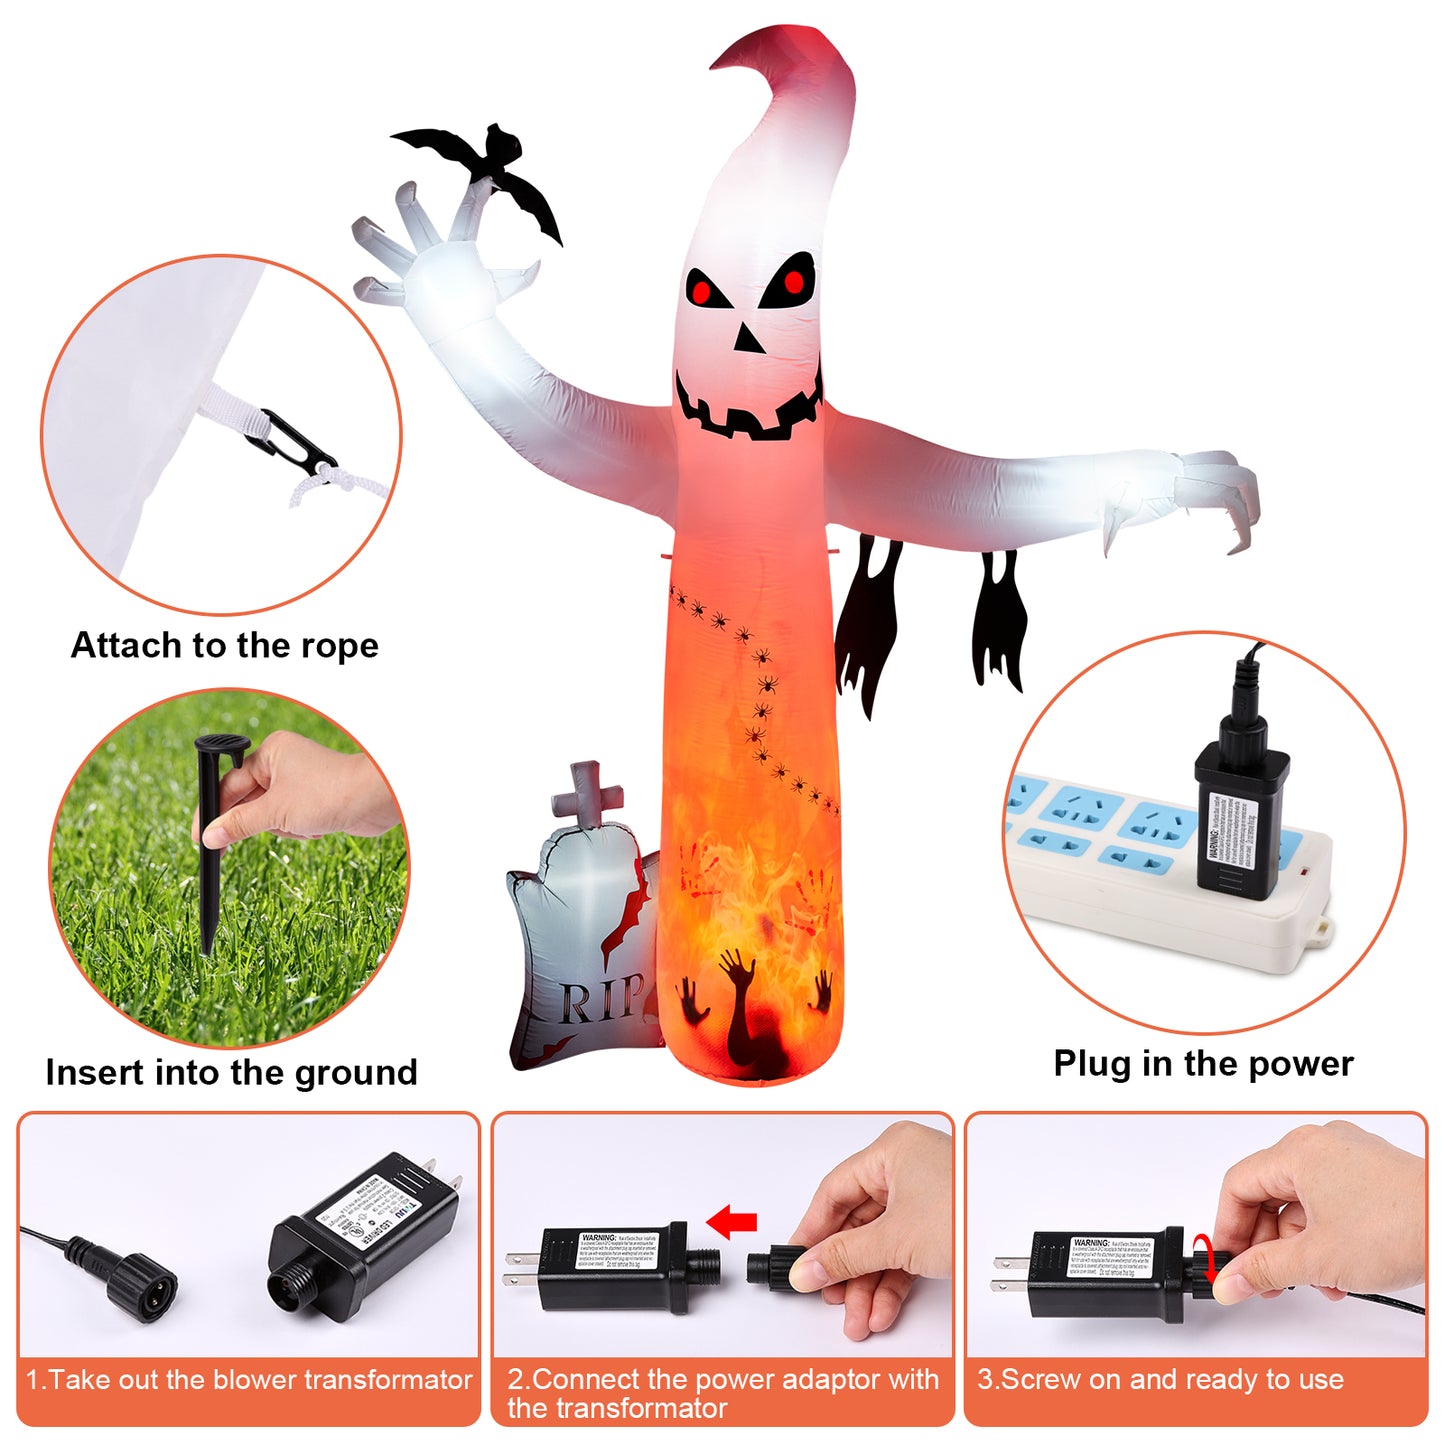 8FT Halloween Inflatables Outdoor Decorations, CAMULAND Large Ghost Decor with Built-in LED Lights for Yard Outside Indoor Party Archway Lawn Scary Blow Up Décor Haloween